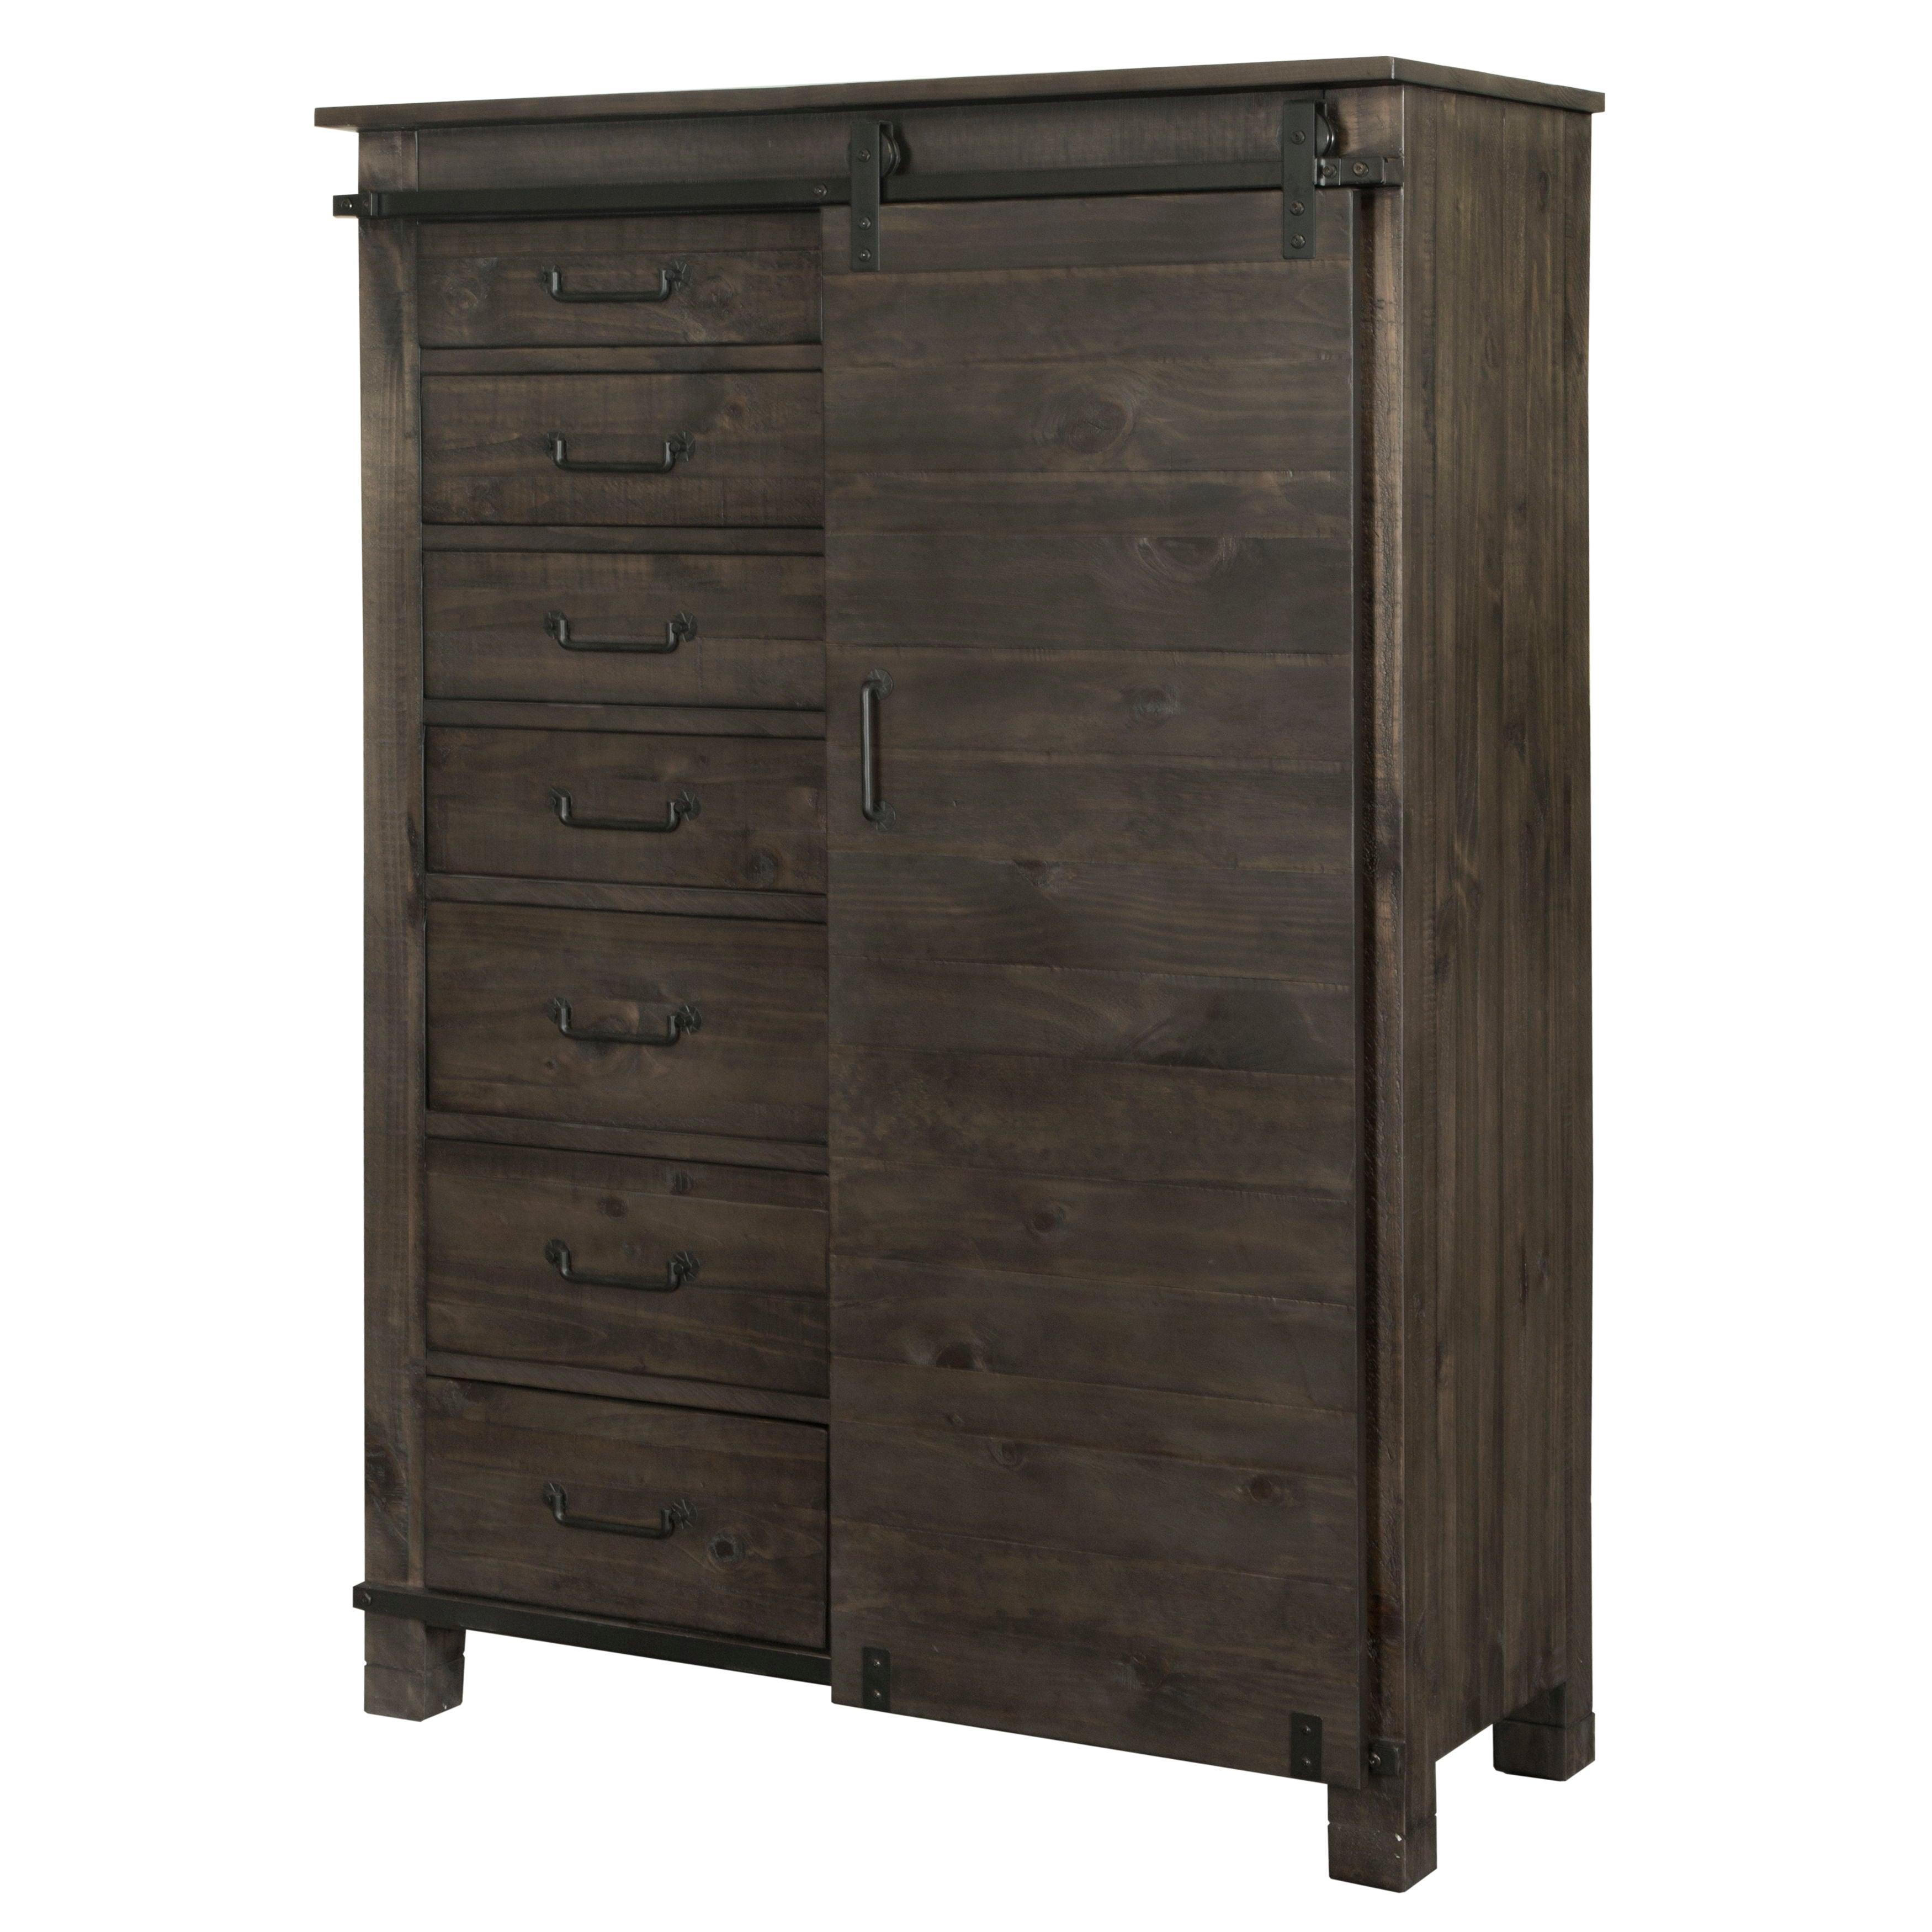 Magnussen Furniture - Abington - Door Chest - Weathered Charcoal - 5th Avenue Furniture